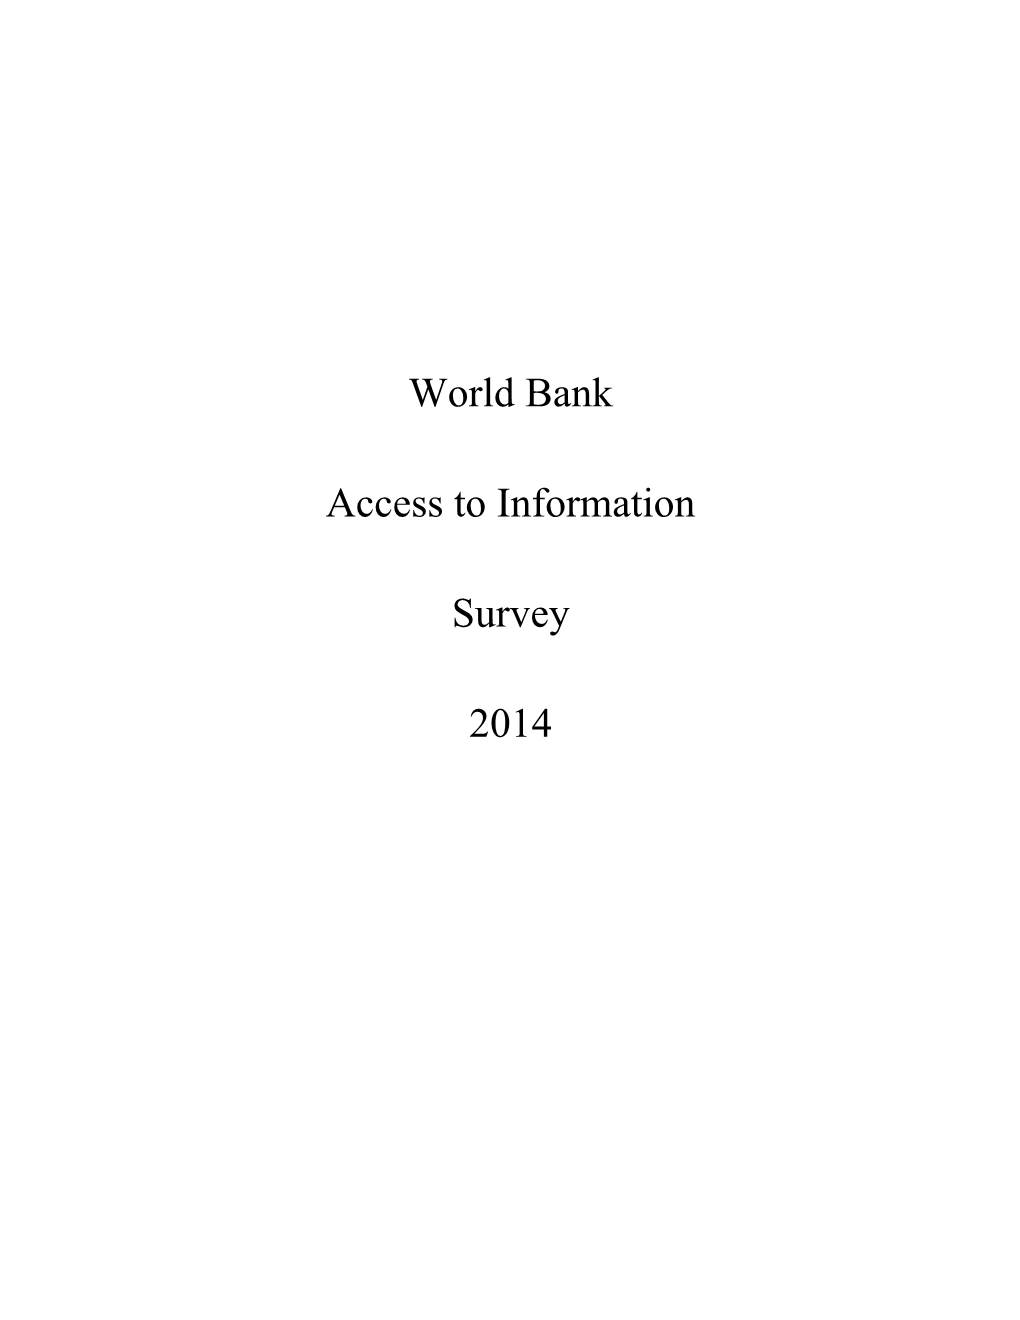 23 3 2016 16 43 9 Access to Information Survey 2014